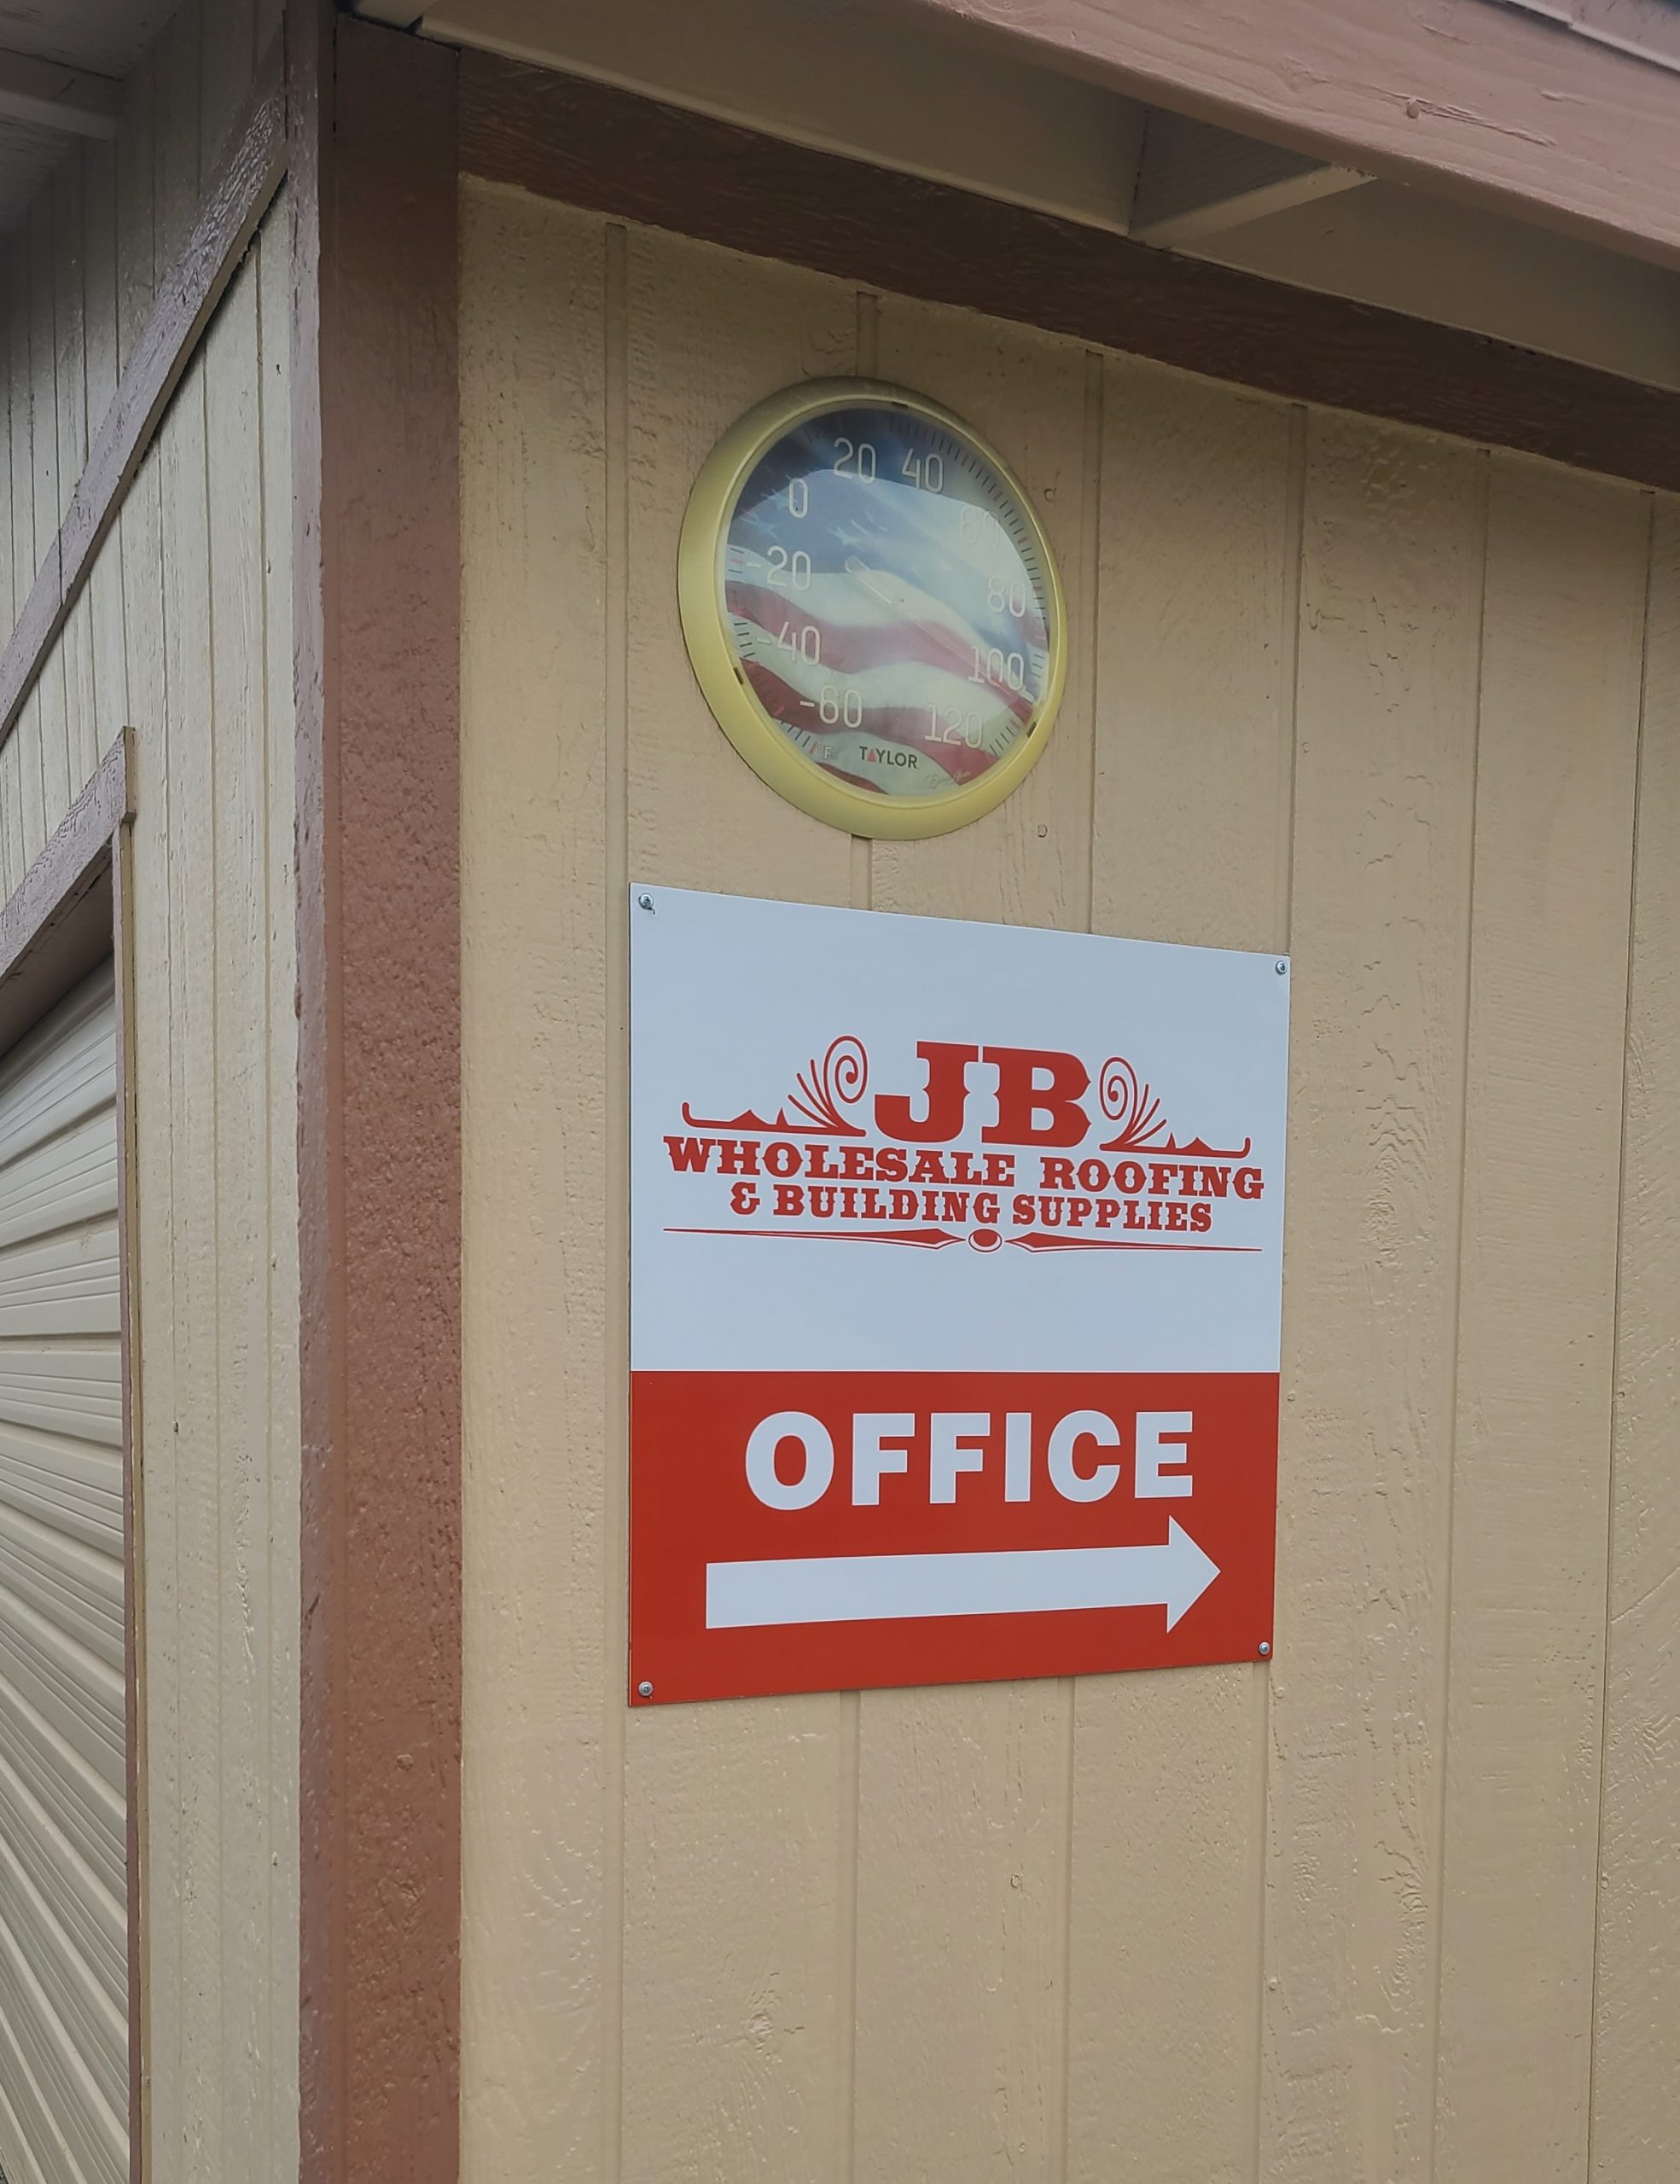 This outdoor directional sign for JB Wholesale Roofing's Murrieta location shows the way to their office, which is helpful for staff and visitors alike.